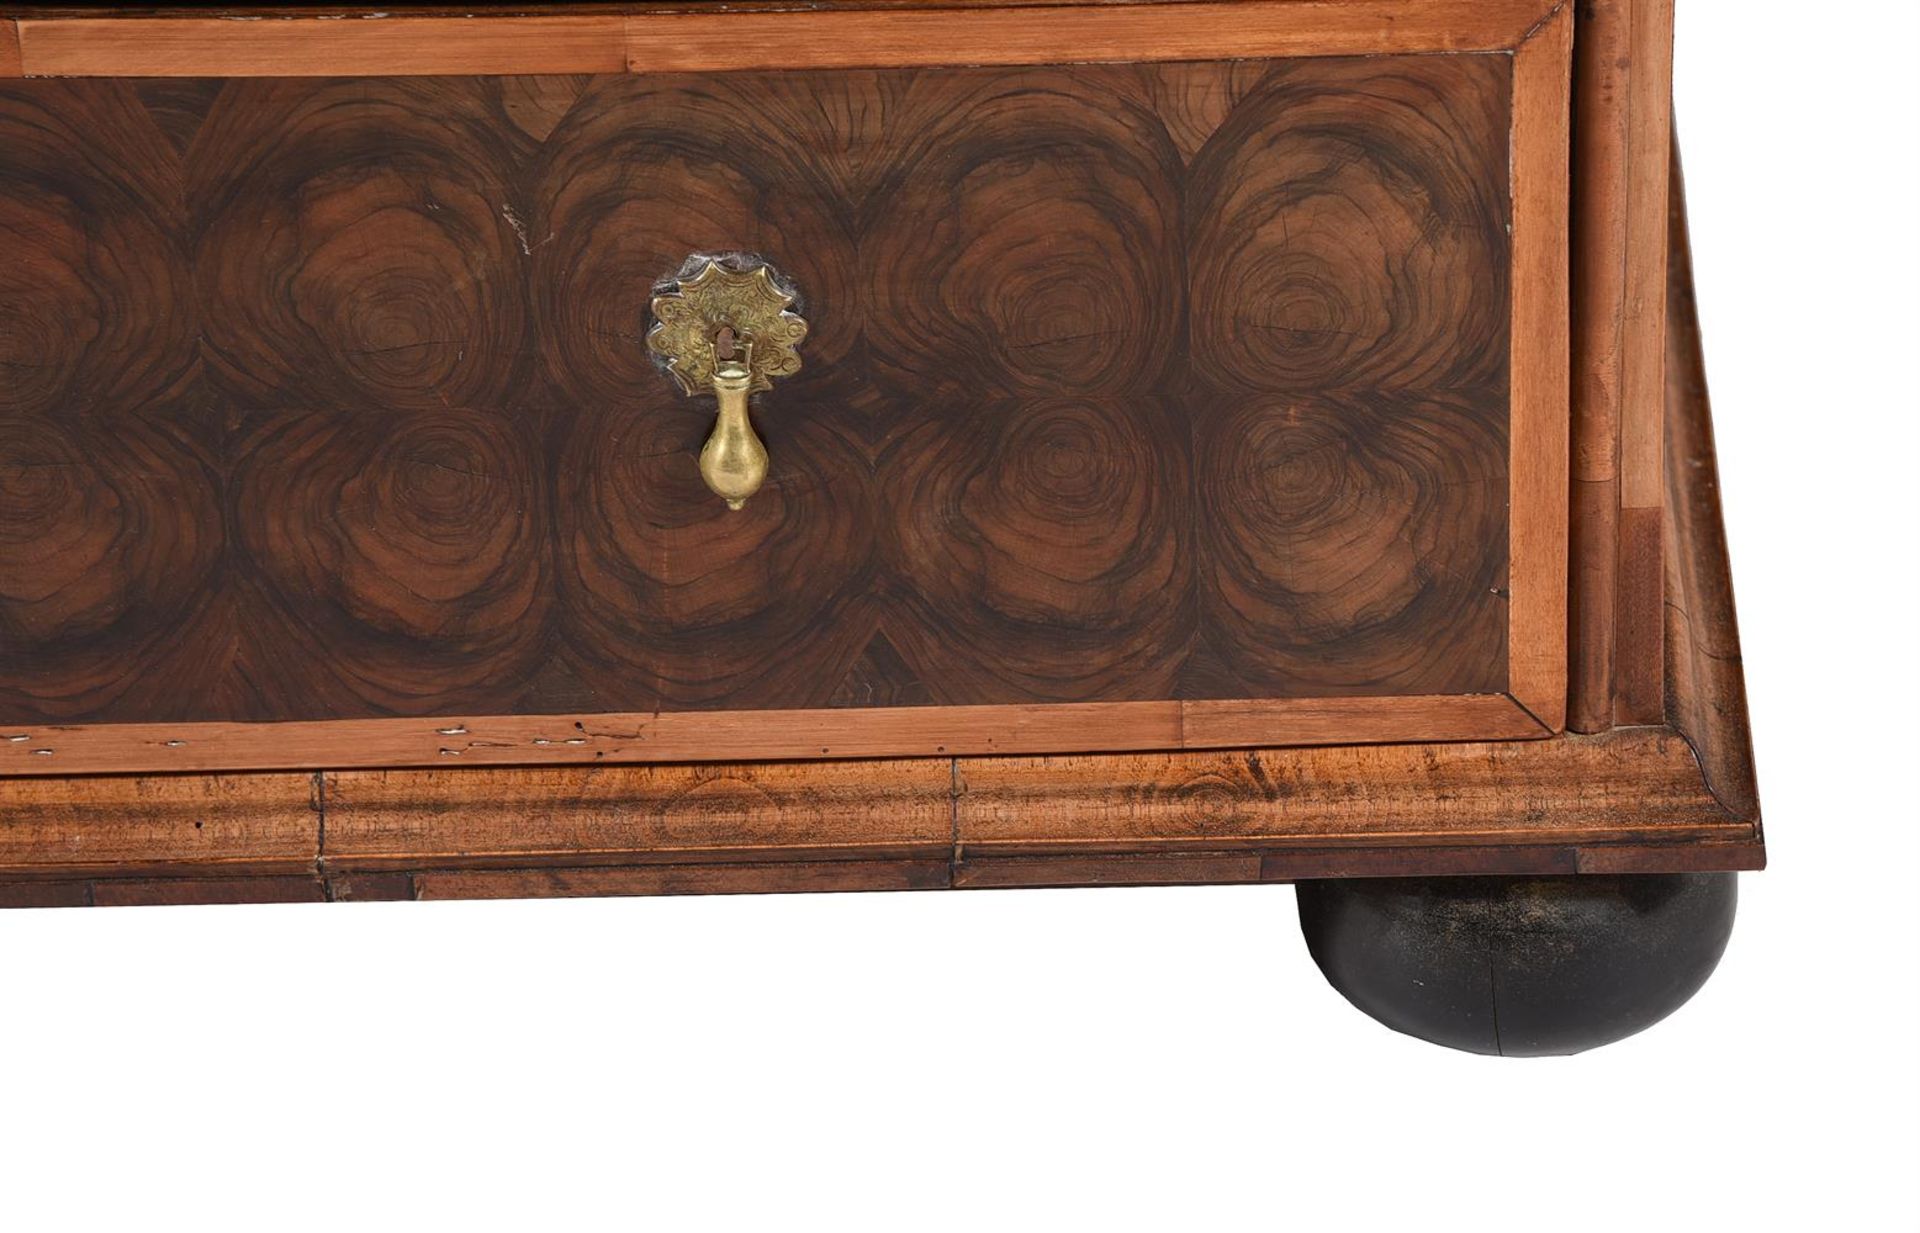 A WILLIAM & MARY OLIVEWOOD 'OYSTER' VENEERED AND MARQUETRY CHEST OF DRAWERS, CIRCA 1690 - Image 3 of 3